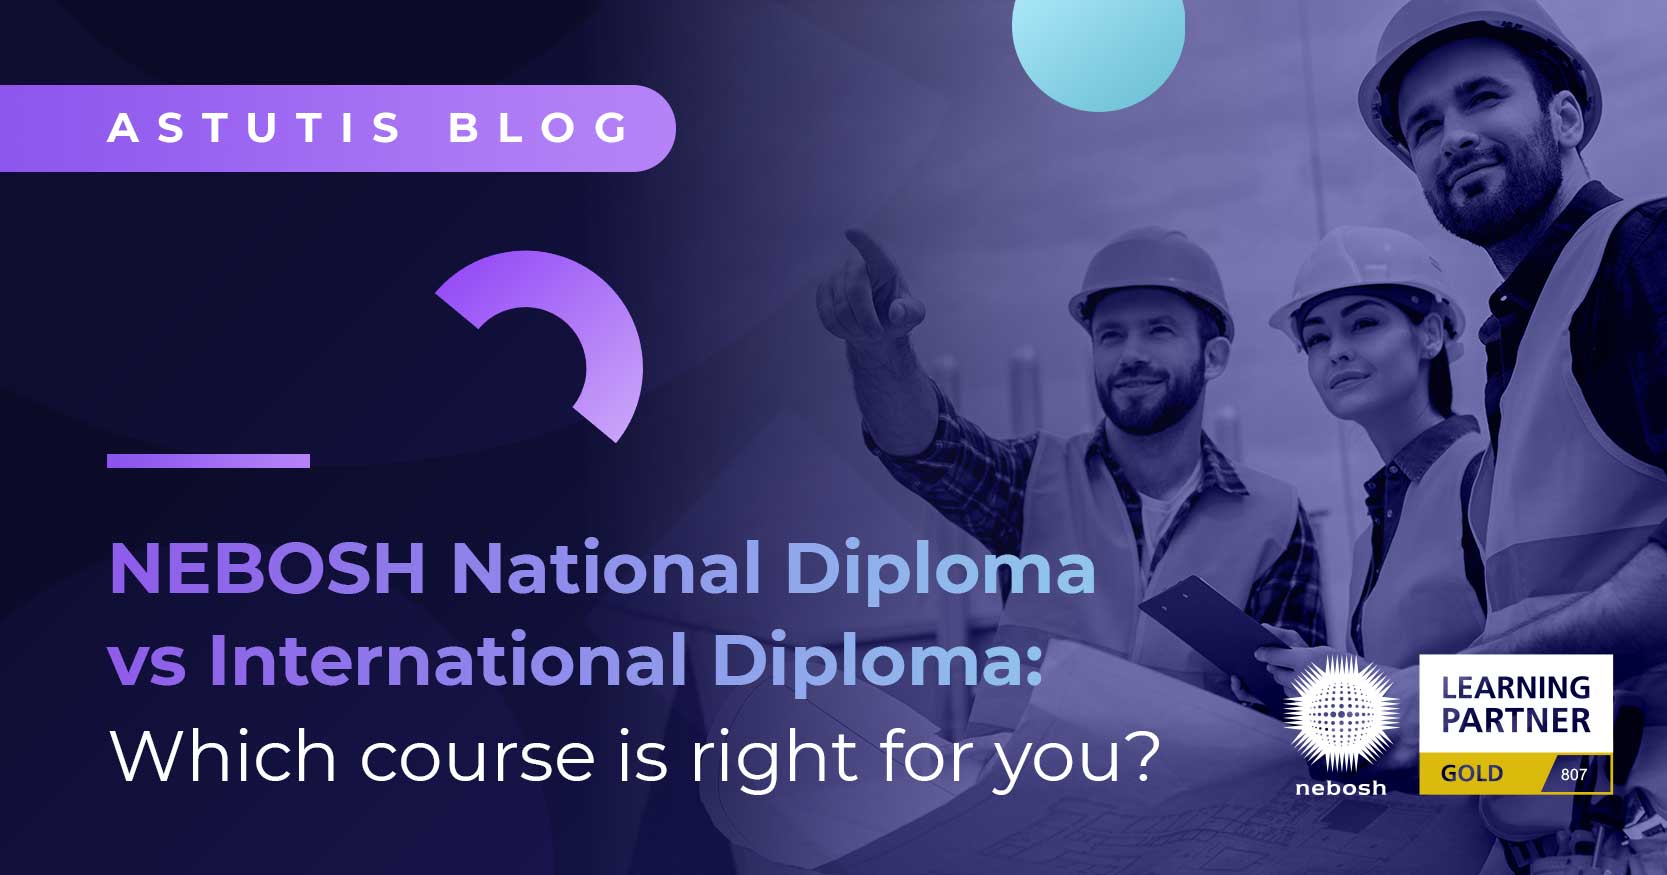 NEBOSH National Diploma vs NEBOSH International Diploma: Which Course is Right for You? Image